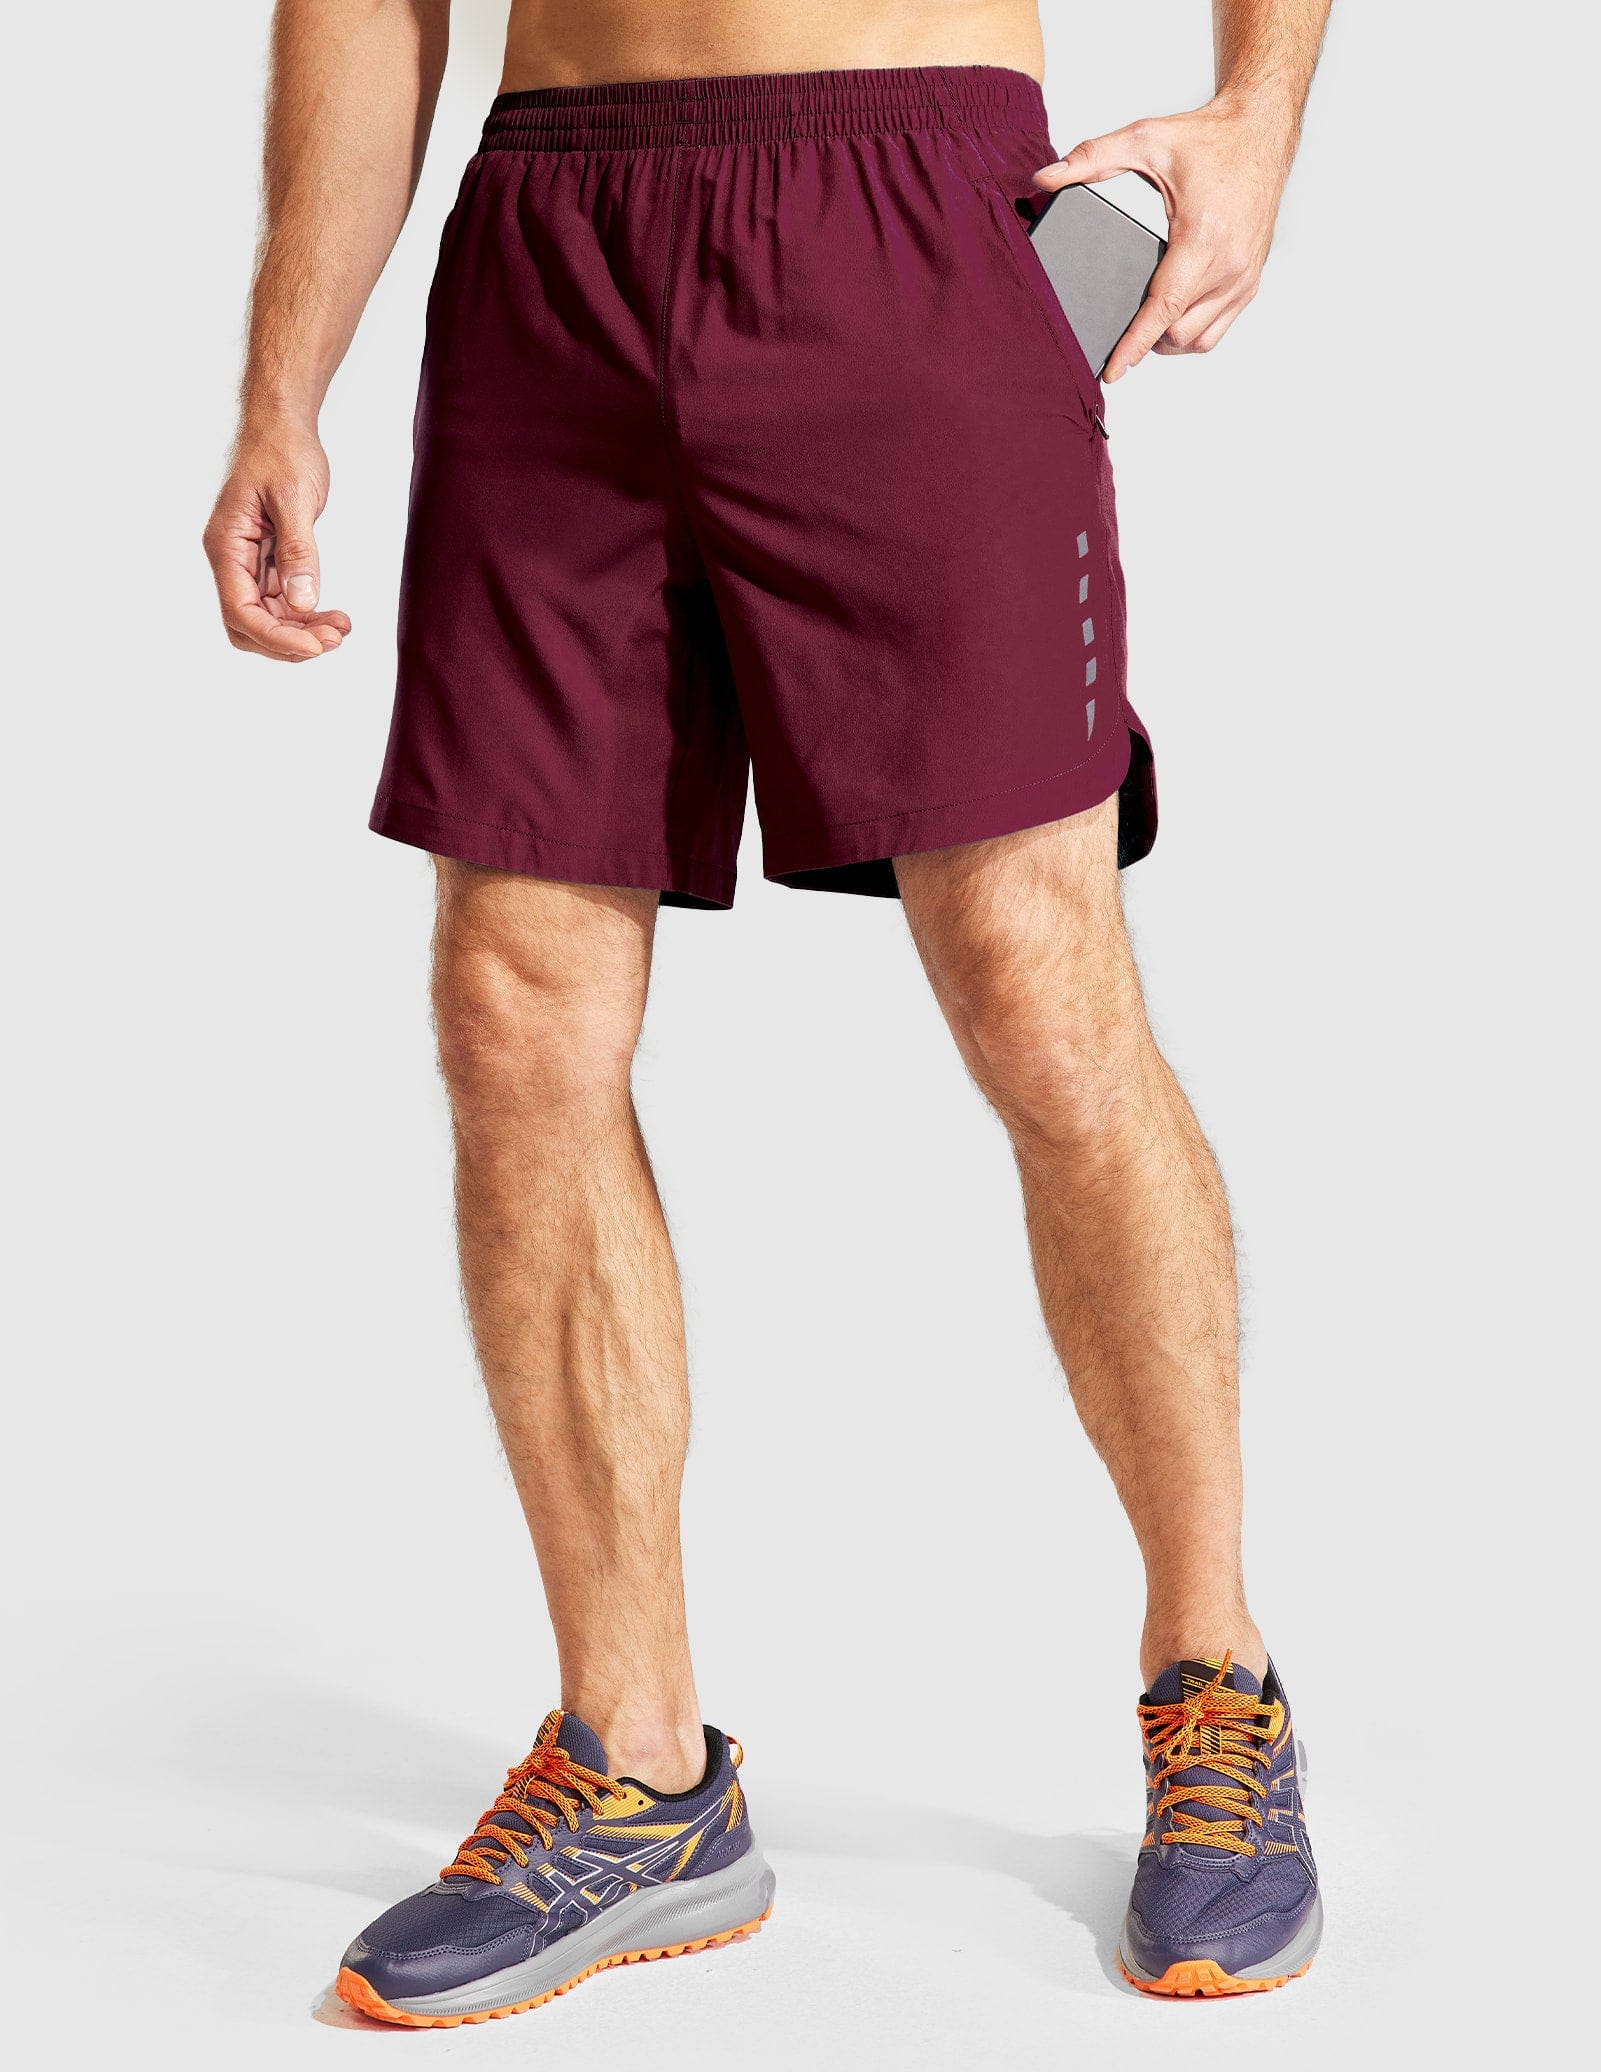 MIER Men's 7 Quick Dry Running Shorts with Zipper Pockets